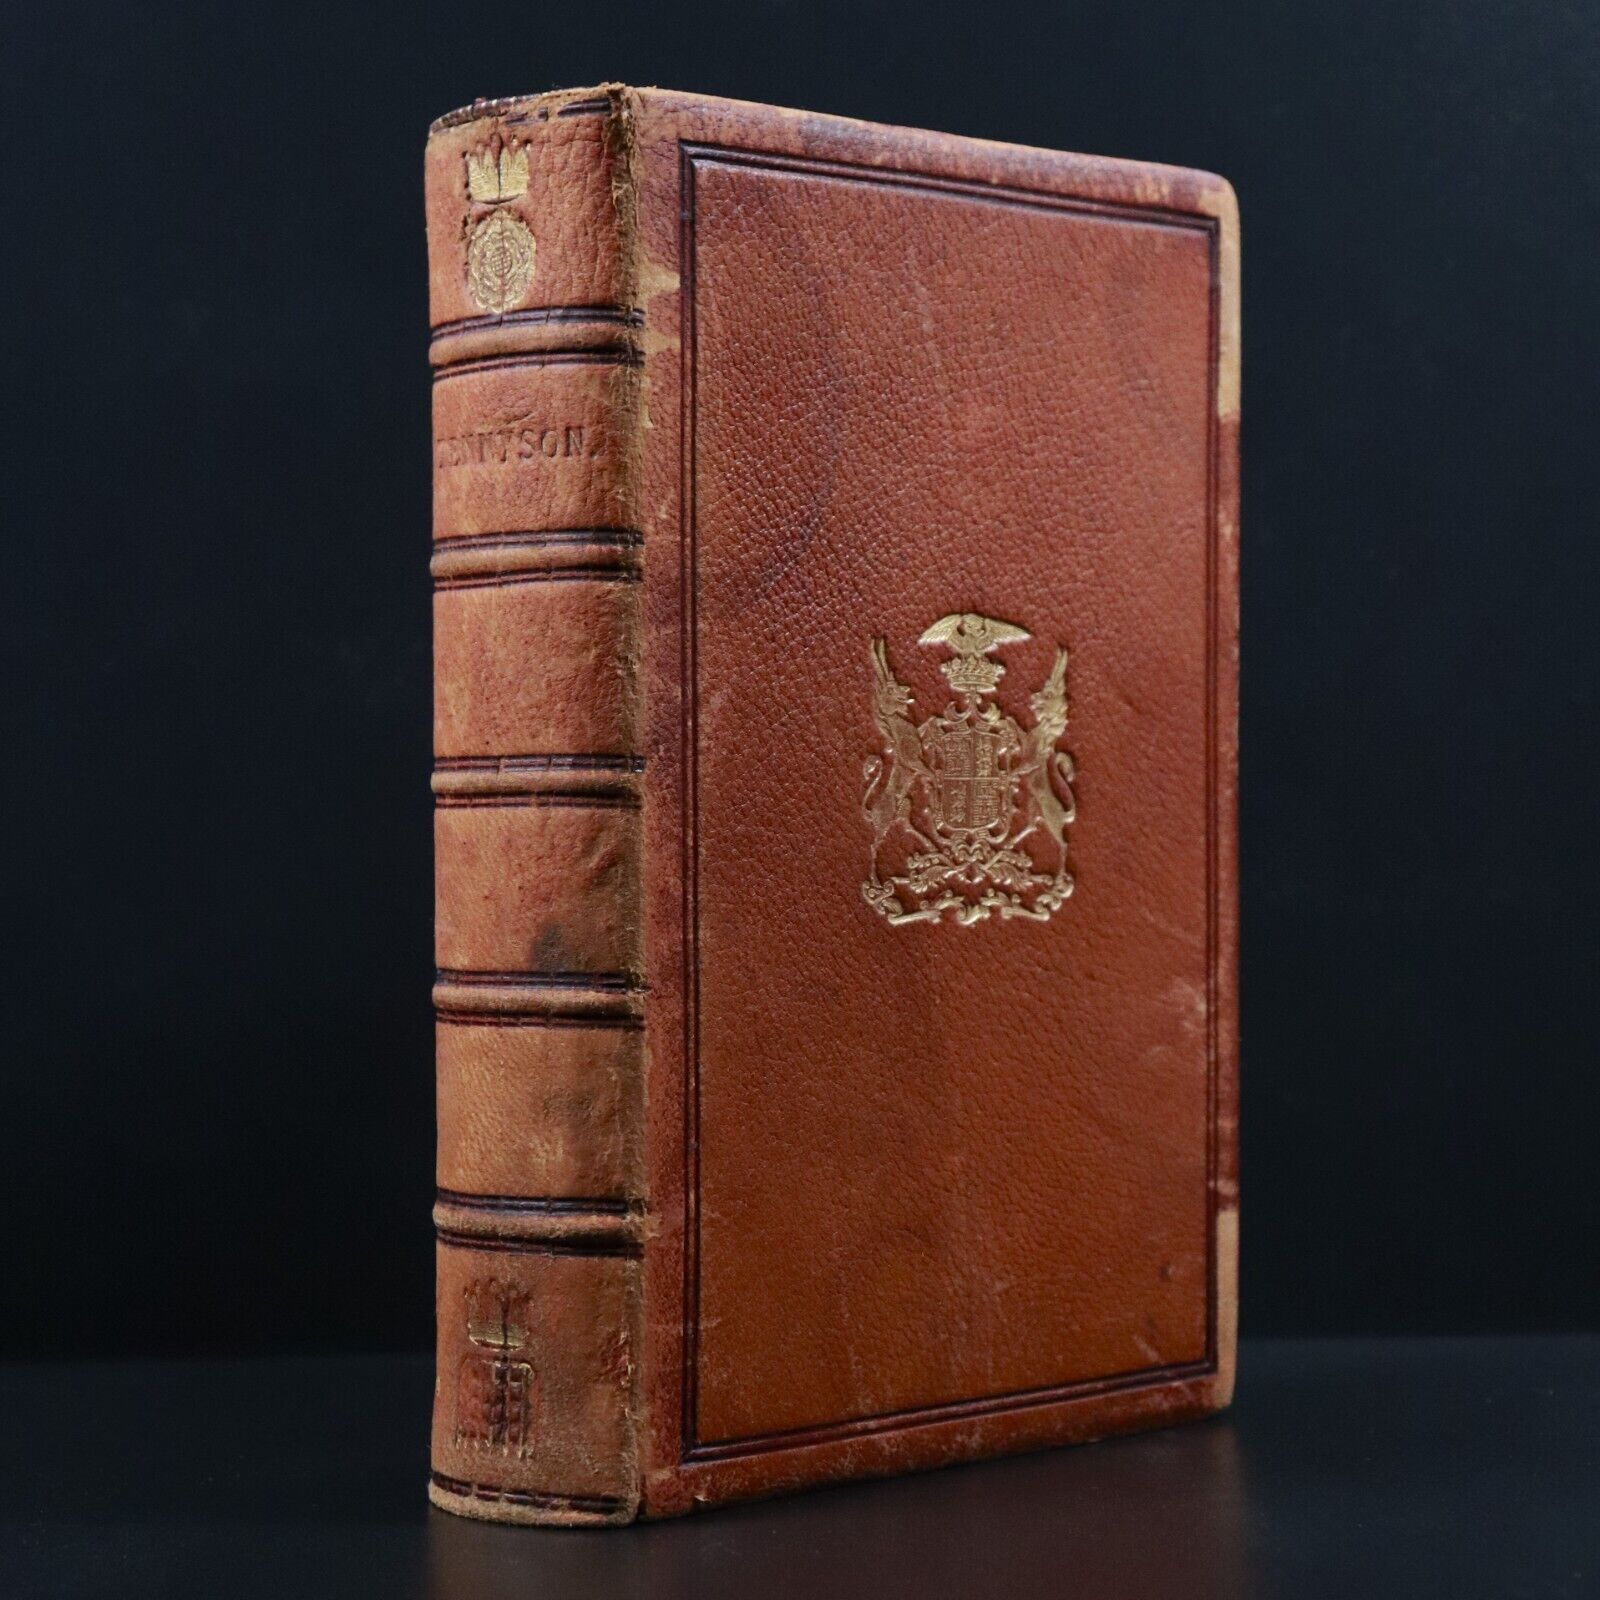 1878 The Works Of Alfred Tennyson Poet Laureate Antique Poetry Book Leather Bind